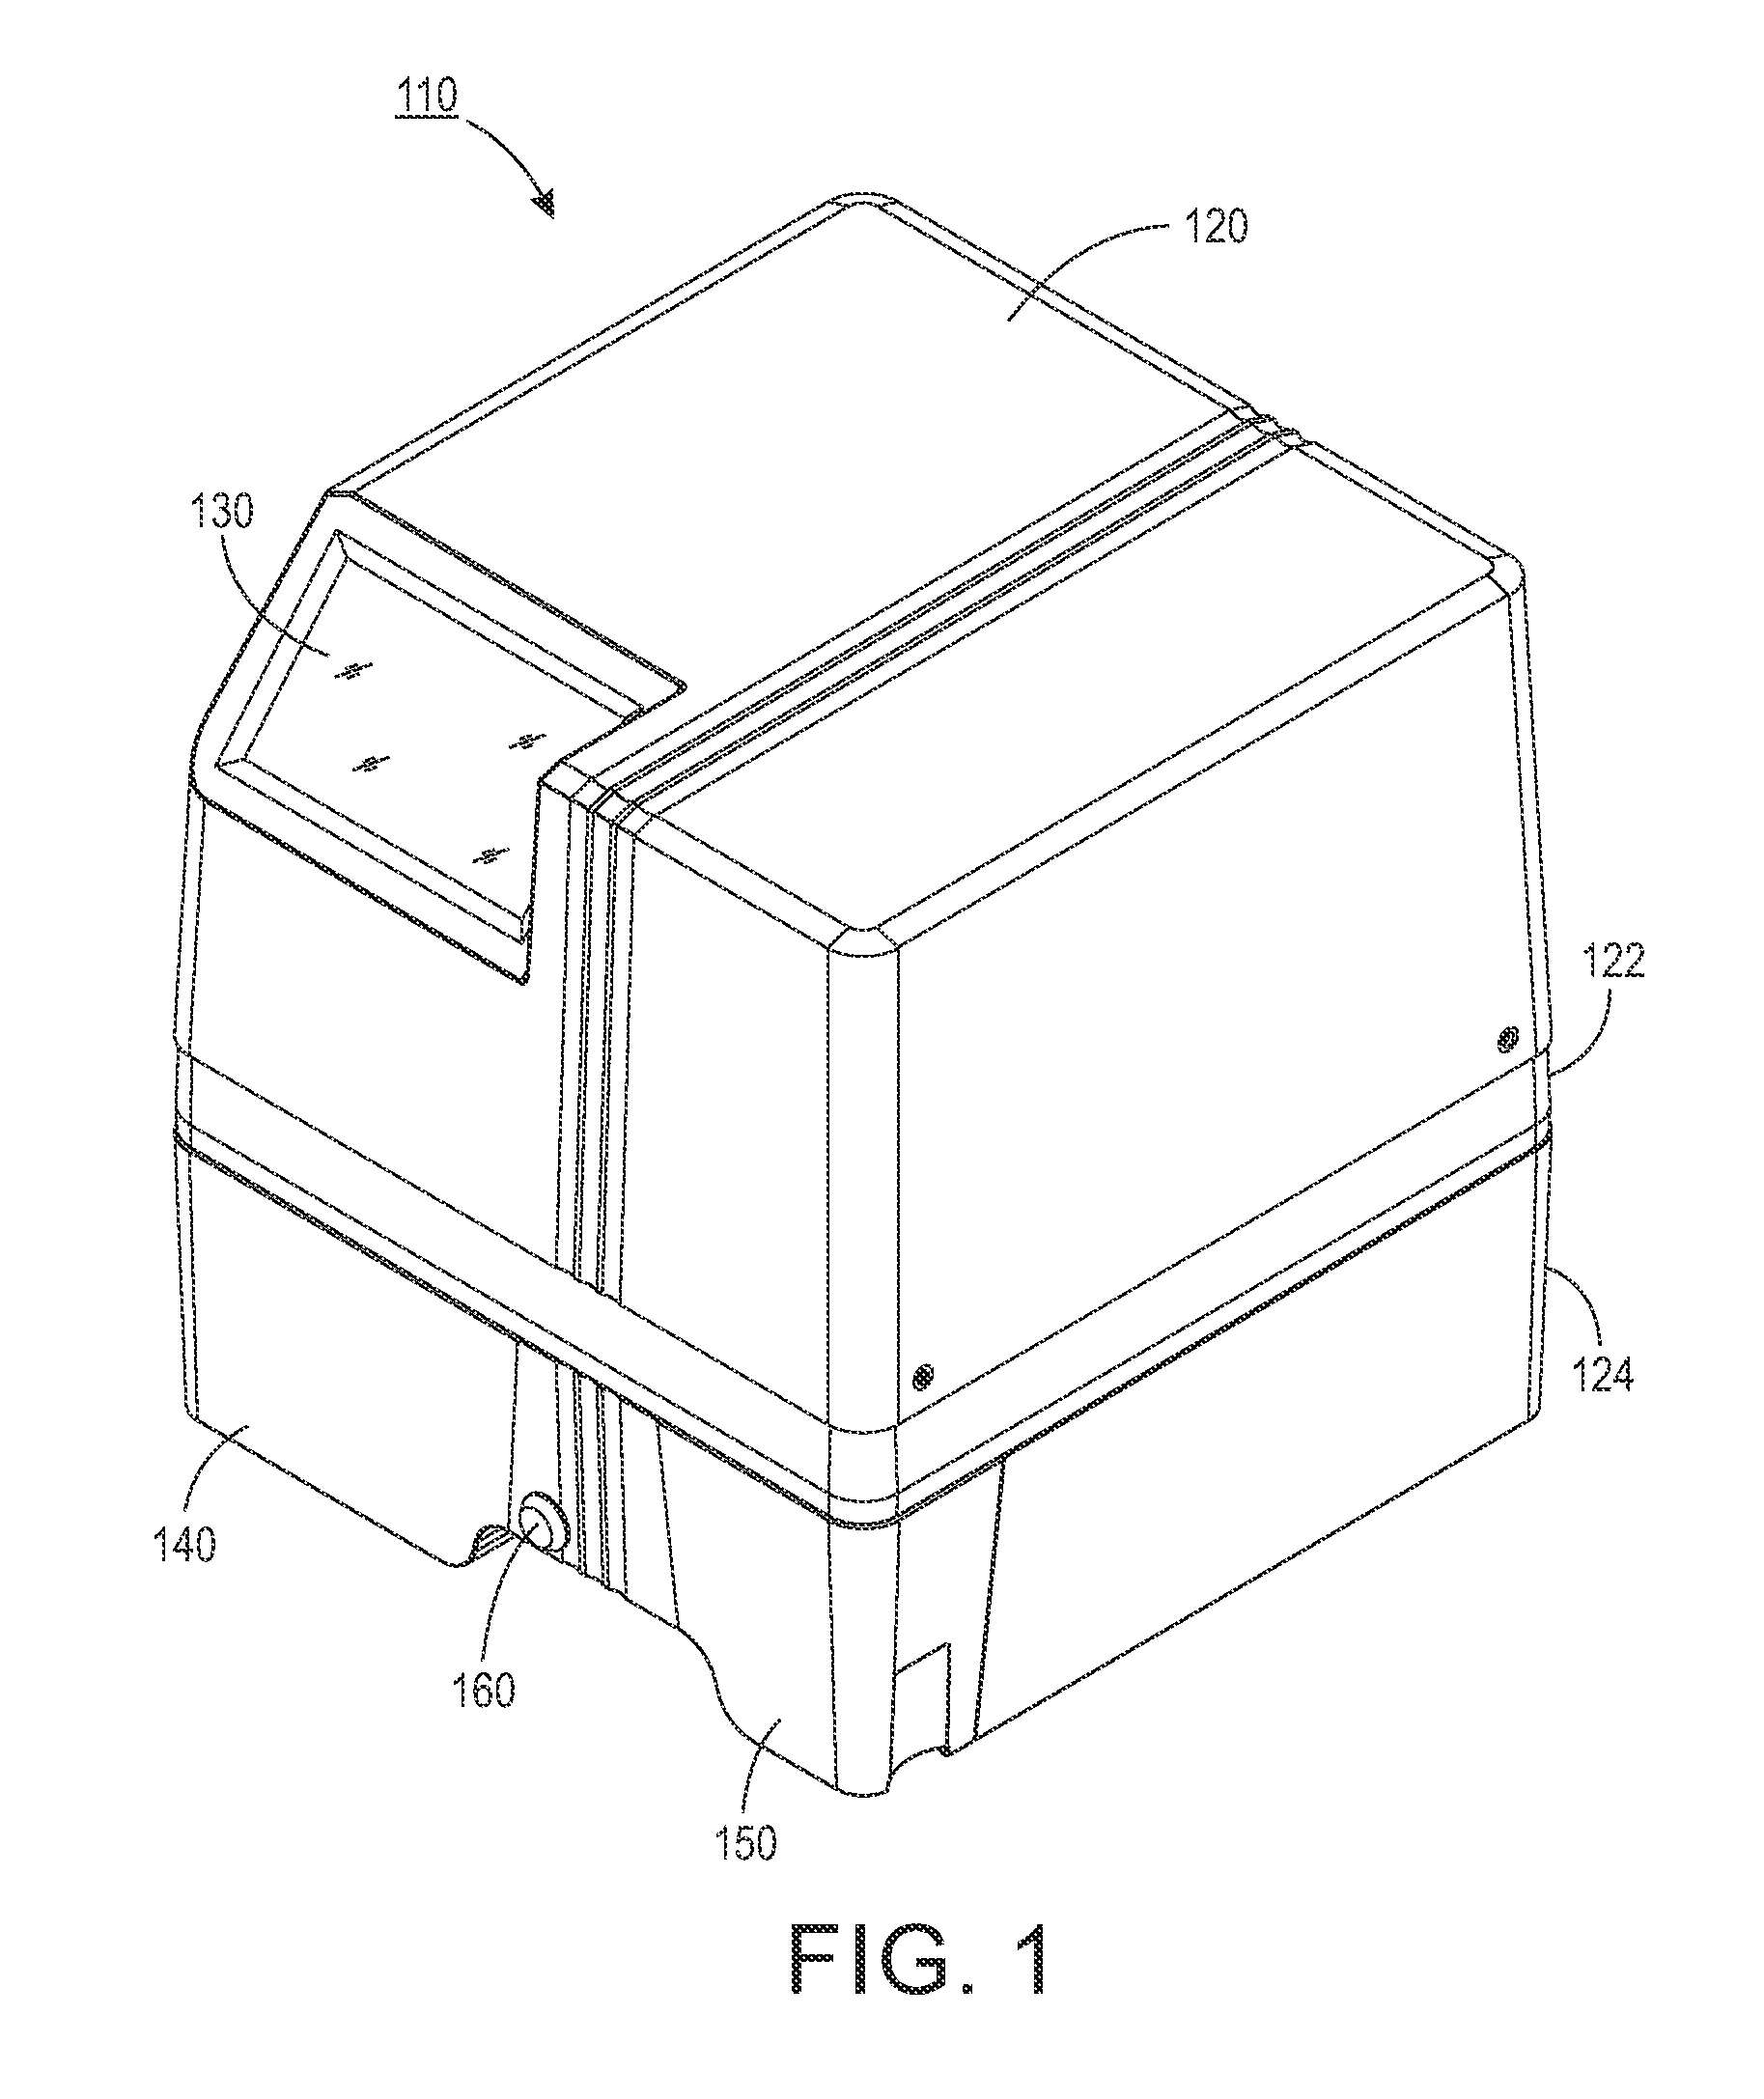 Object dispenser having a variable orifice and image identification